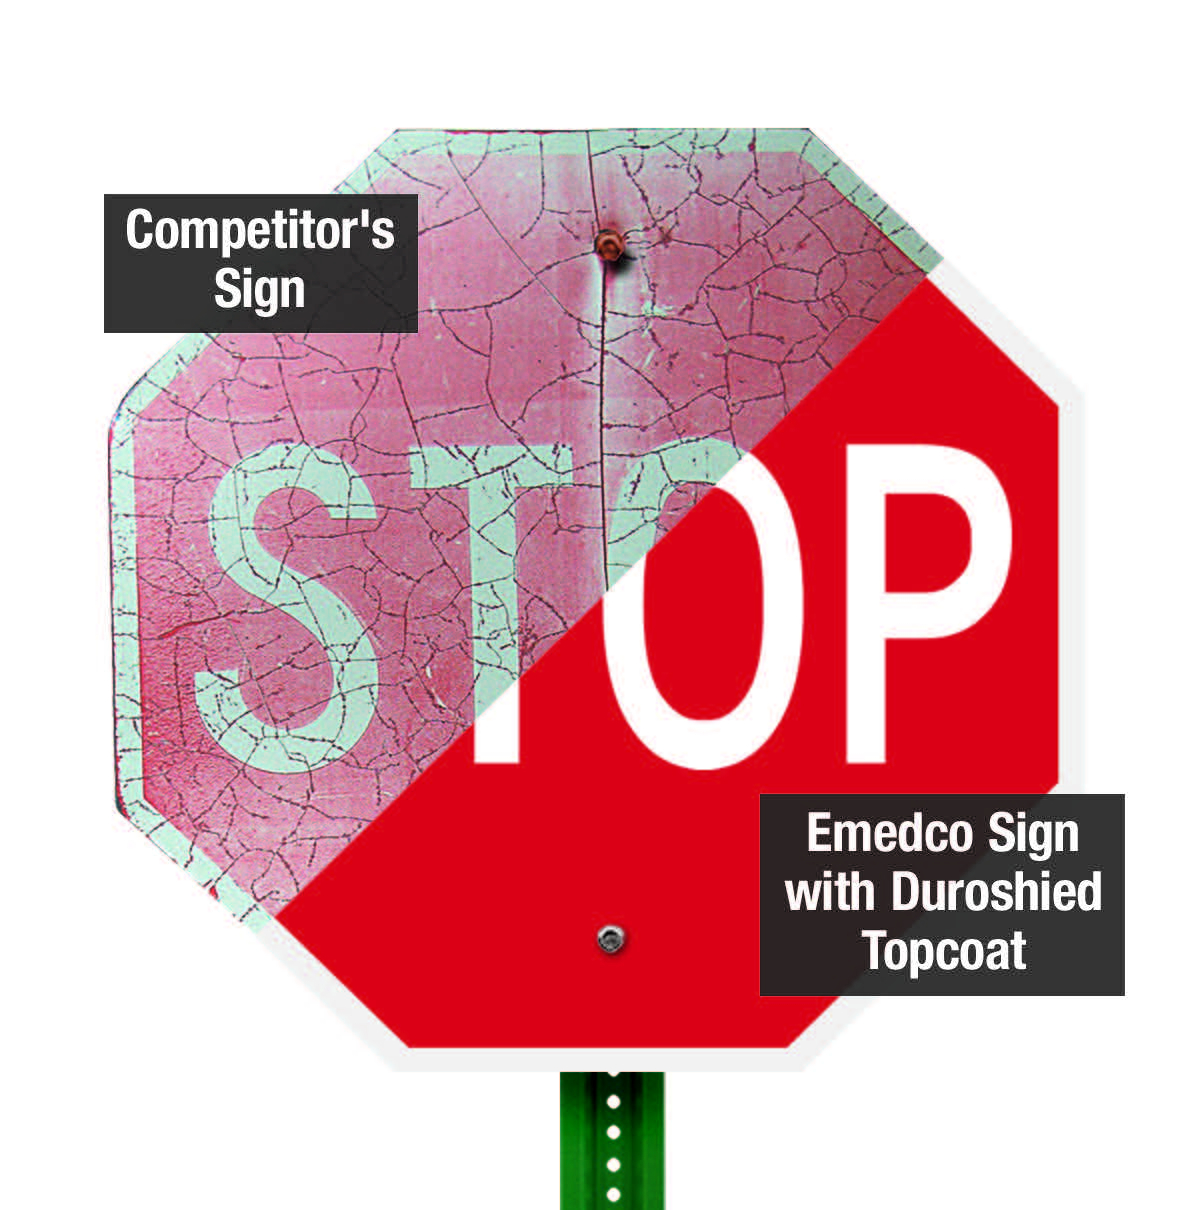 Emedco Stop Sign with Duroshield Topcoat - Lifetime Guarantee